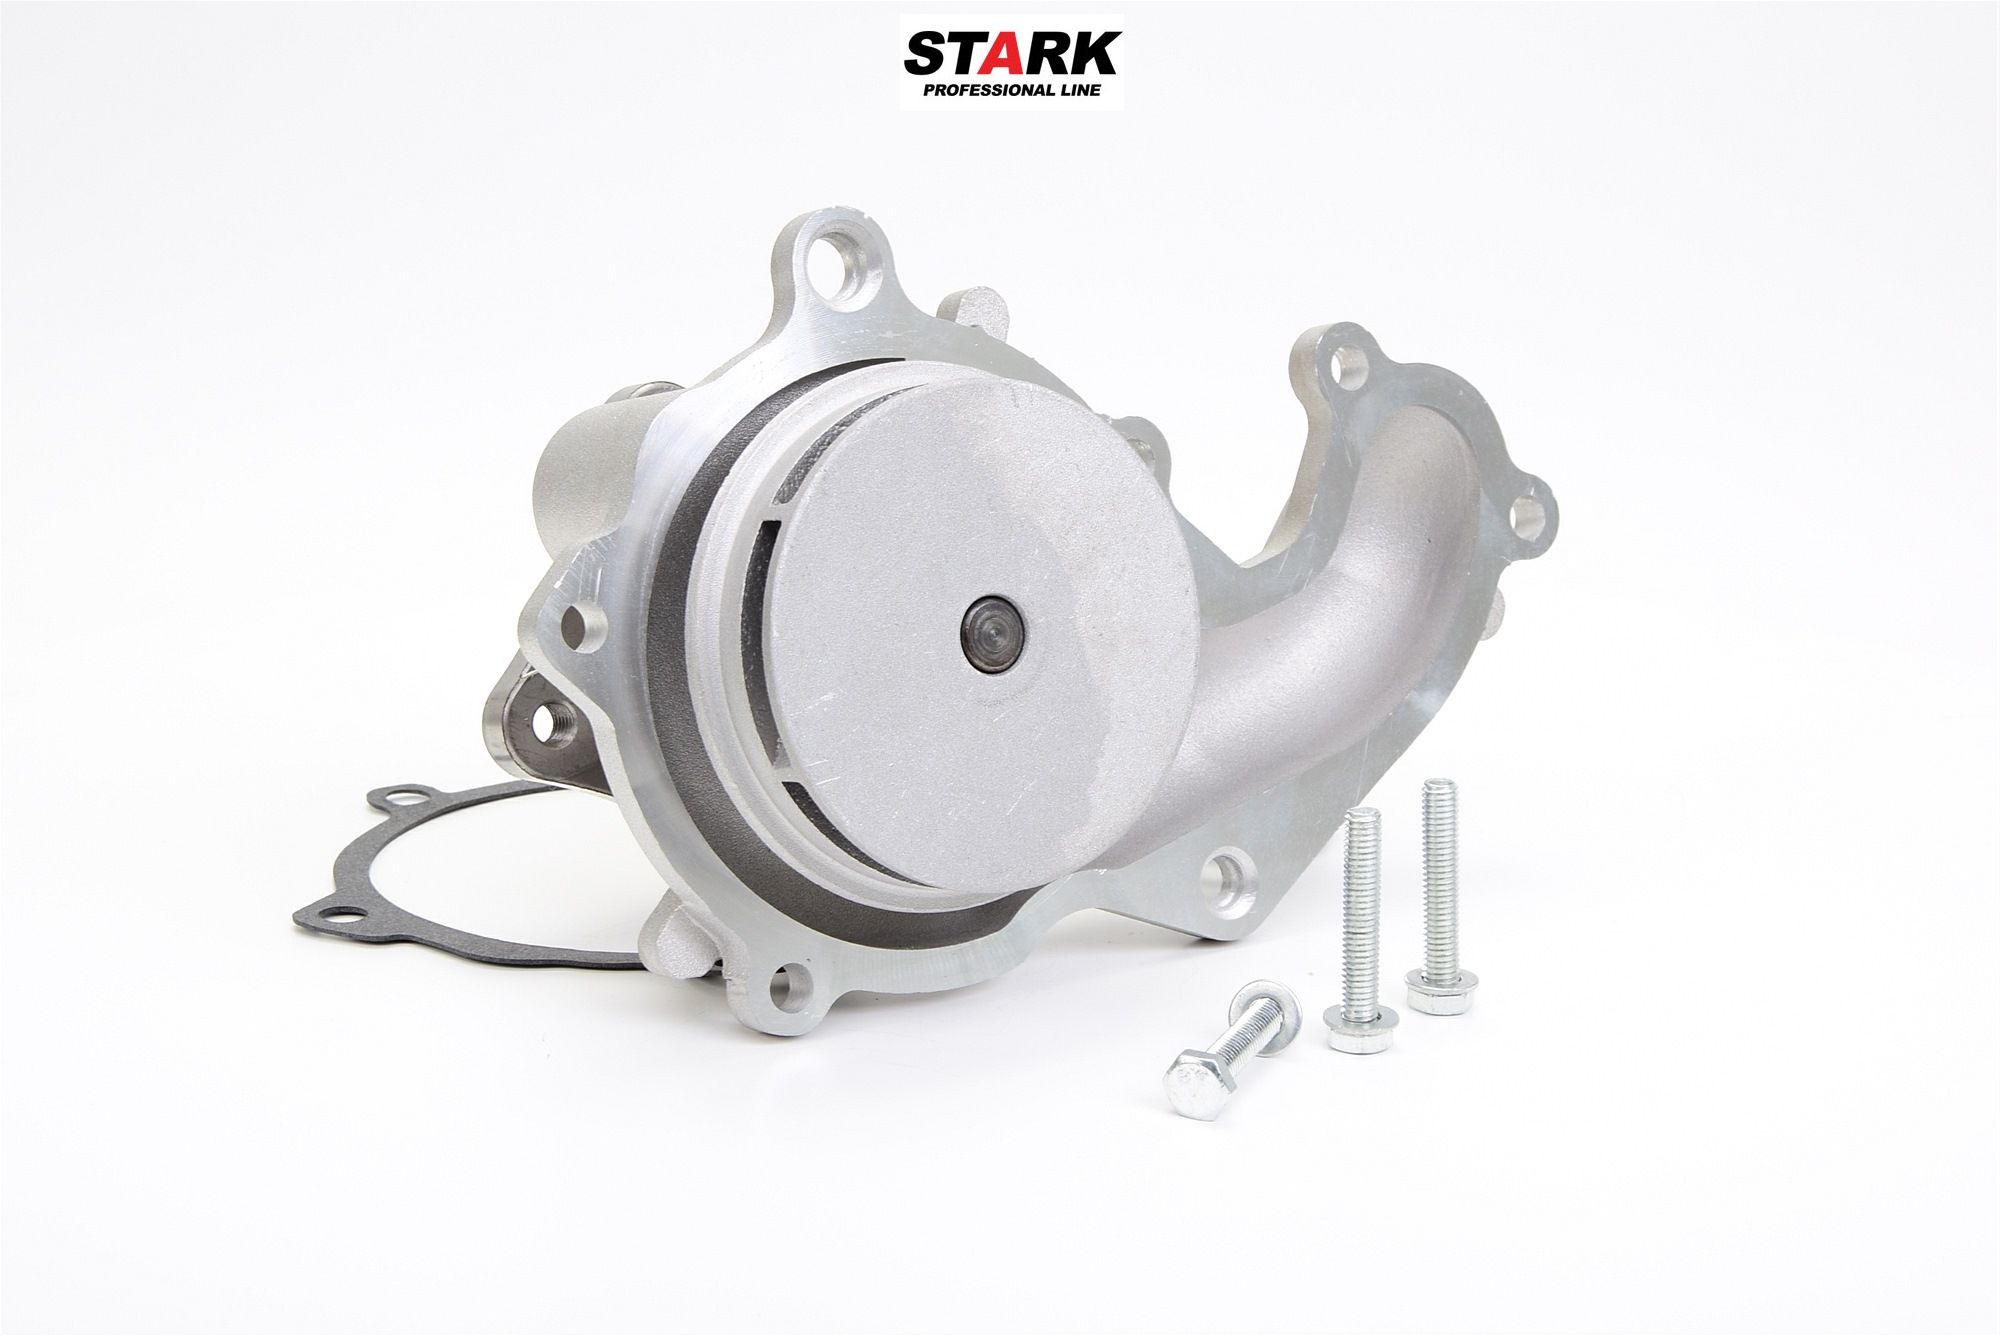 STARK SKWP-0520024 Water pump without belt pulley, with gaskets/seals, with screw set, for v-ribbed belt use